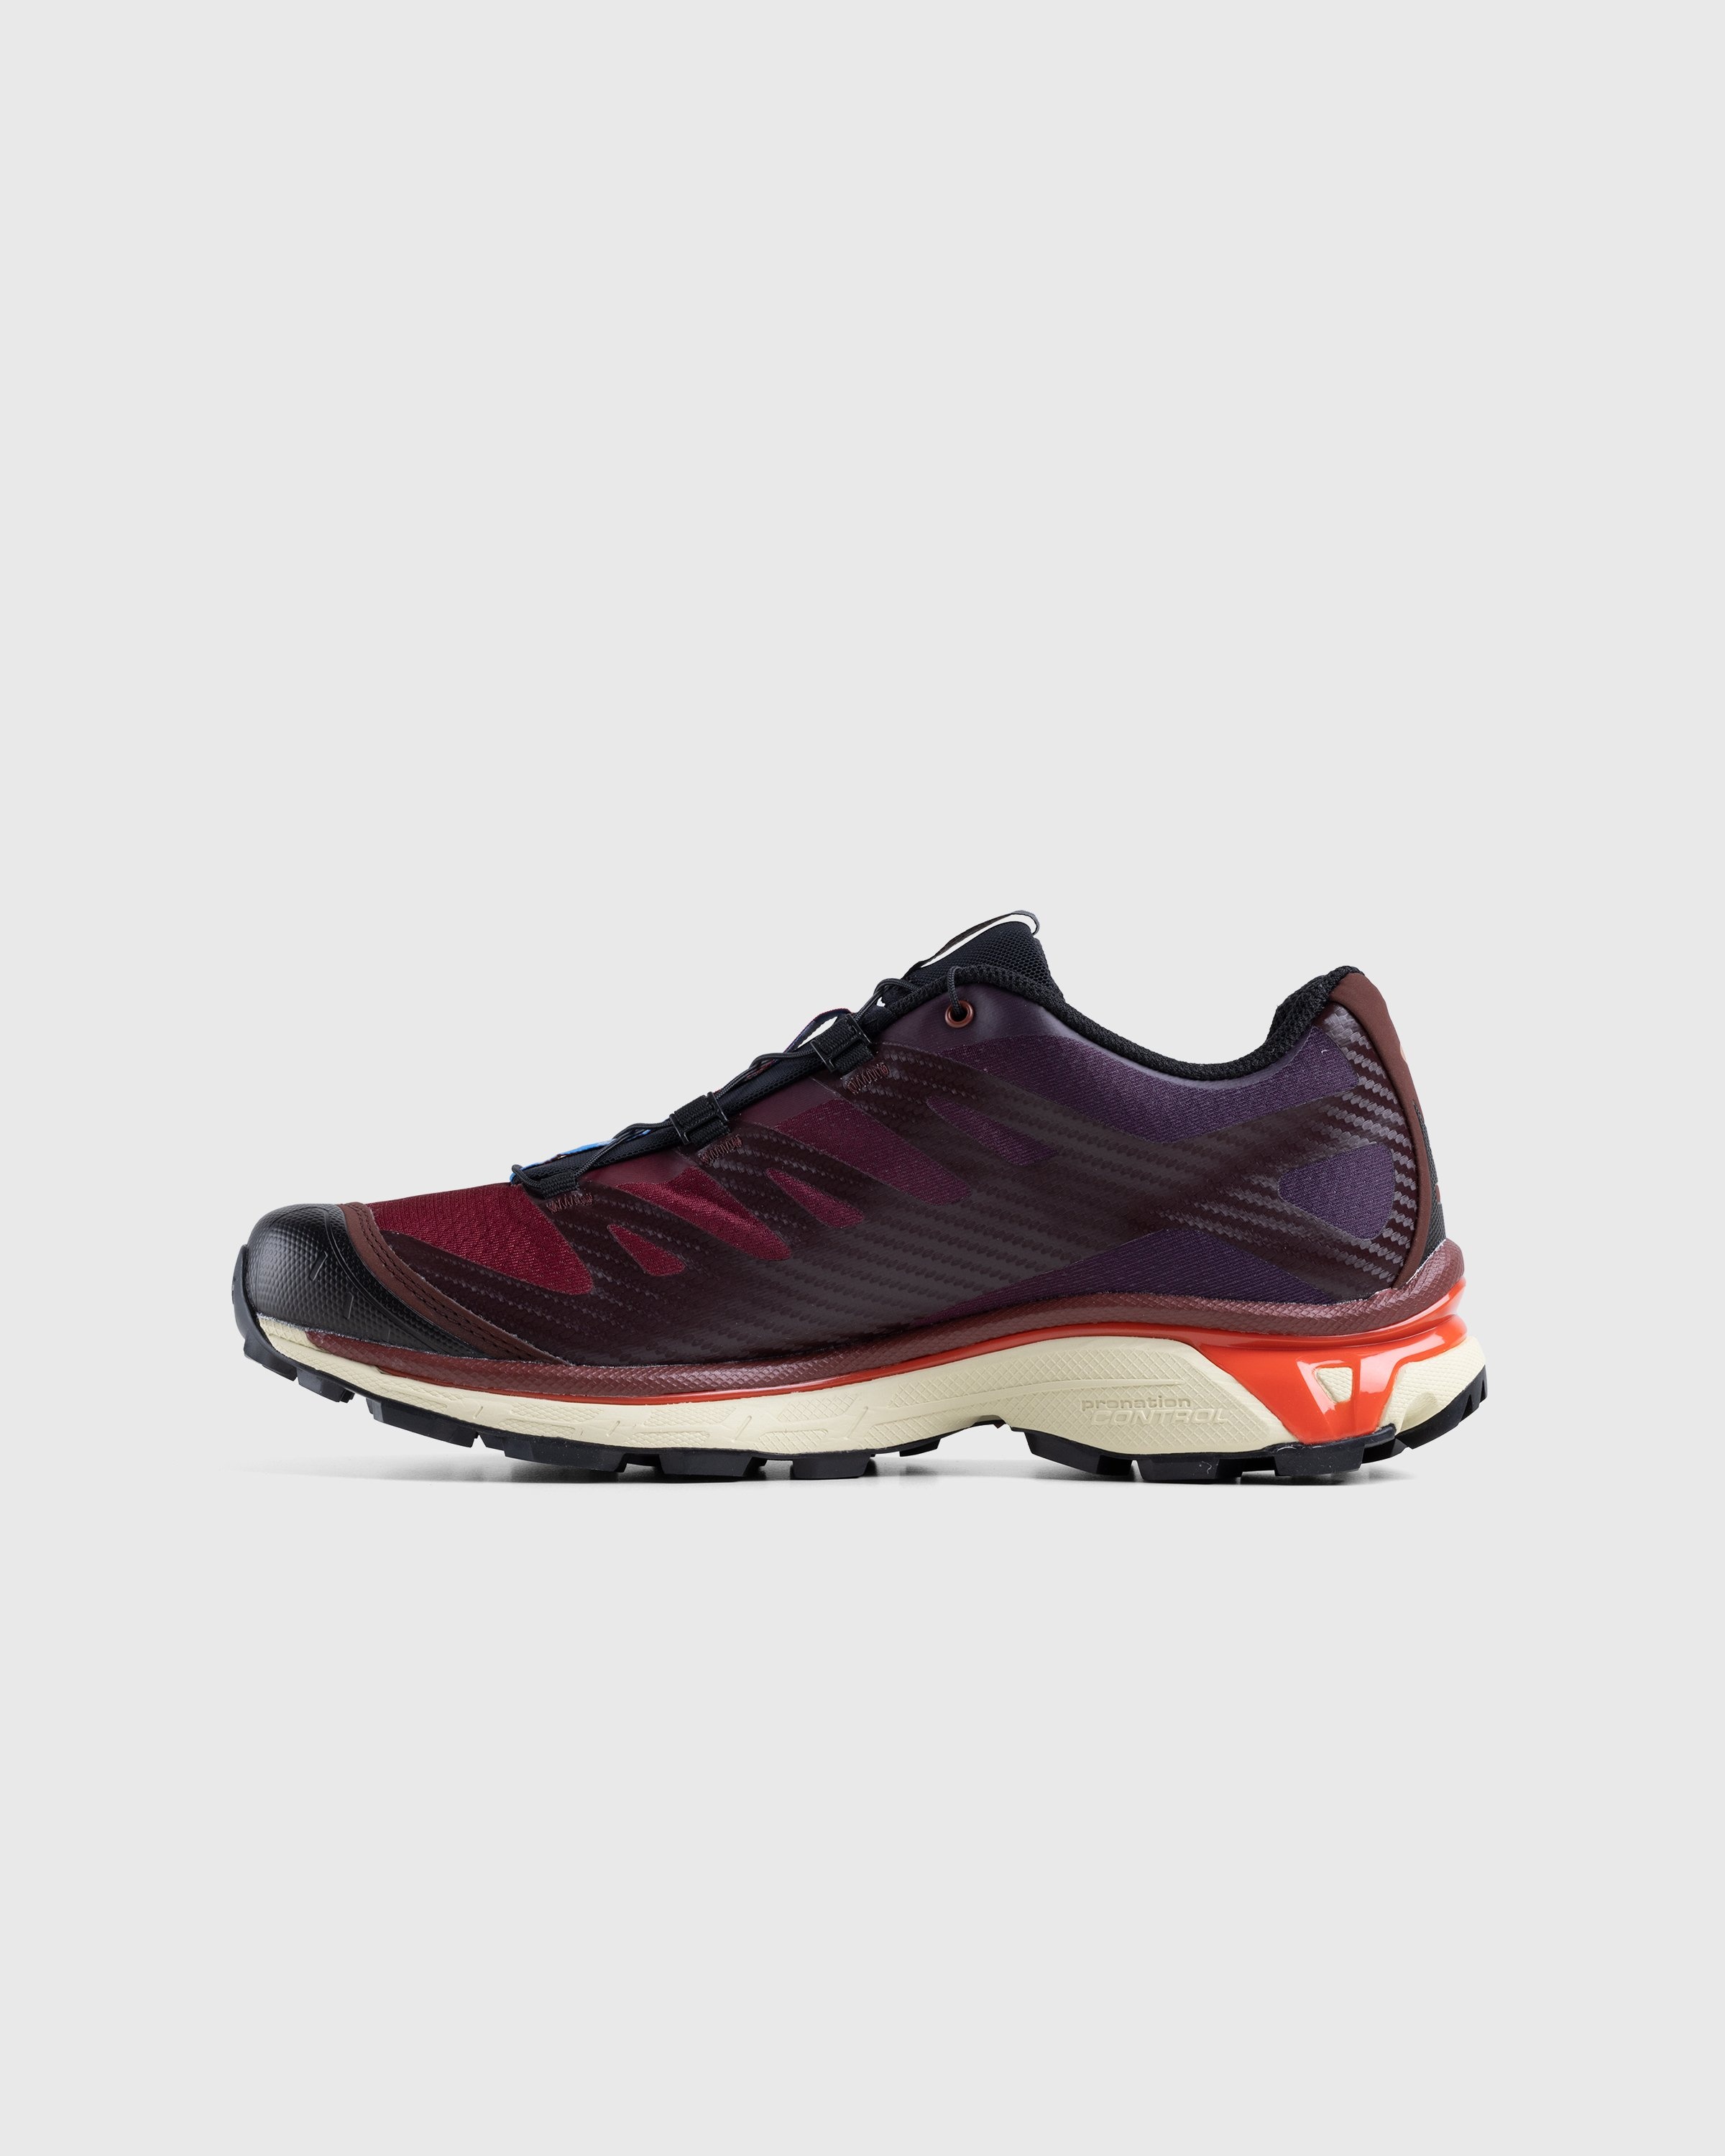 Salomon – XT-4 Bitter Chocolate/Mocha Mousse/Fiery Red - Sneakers - Red - Image 2